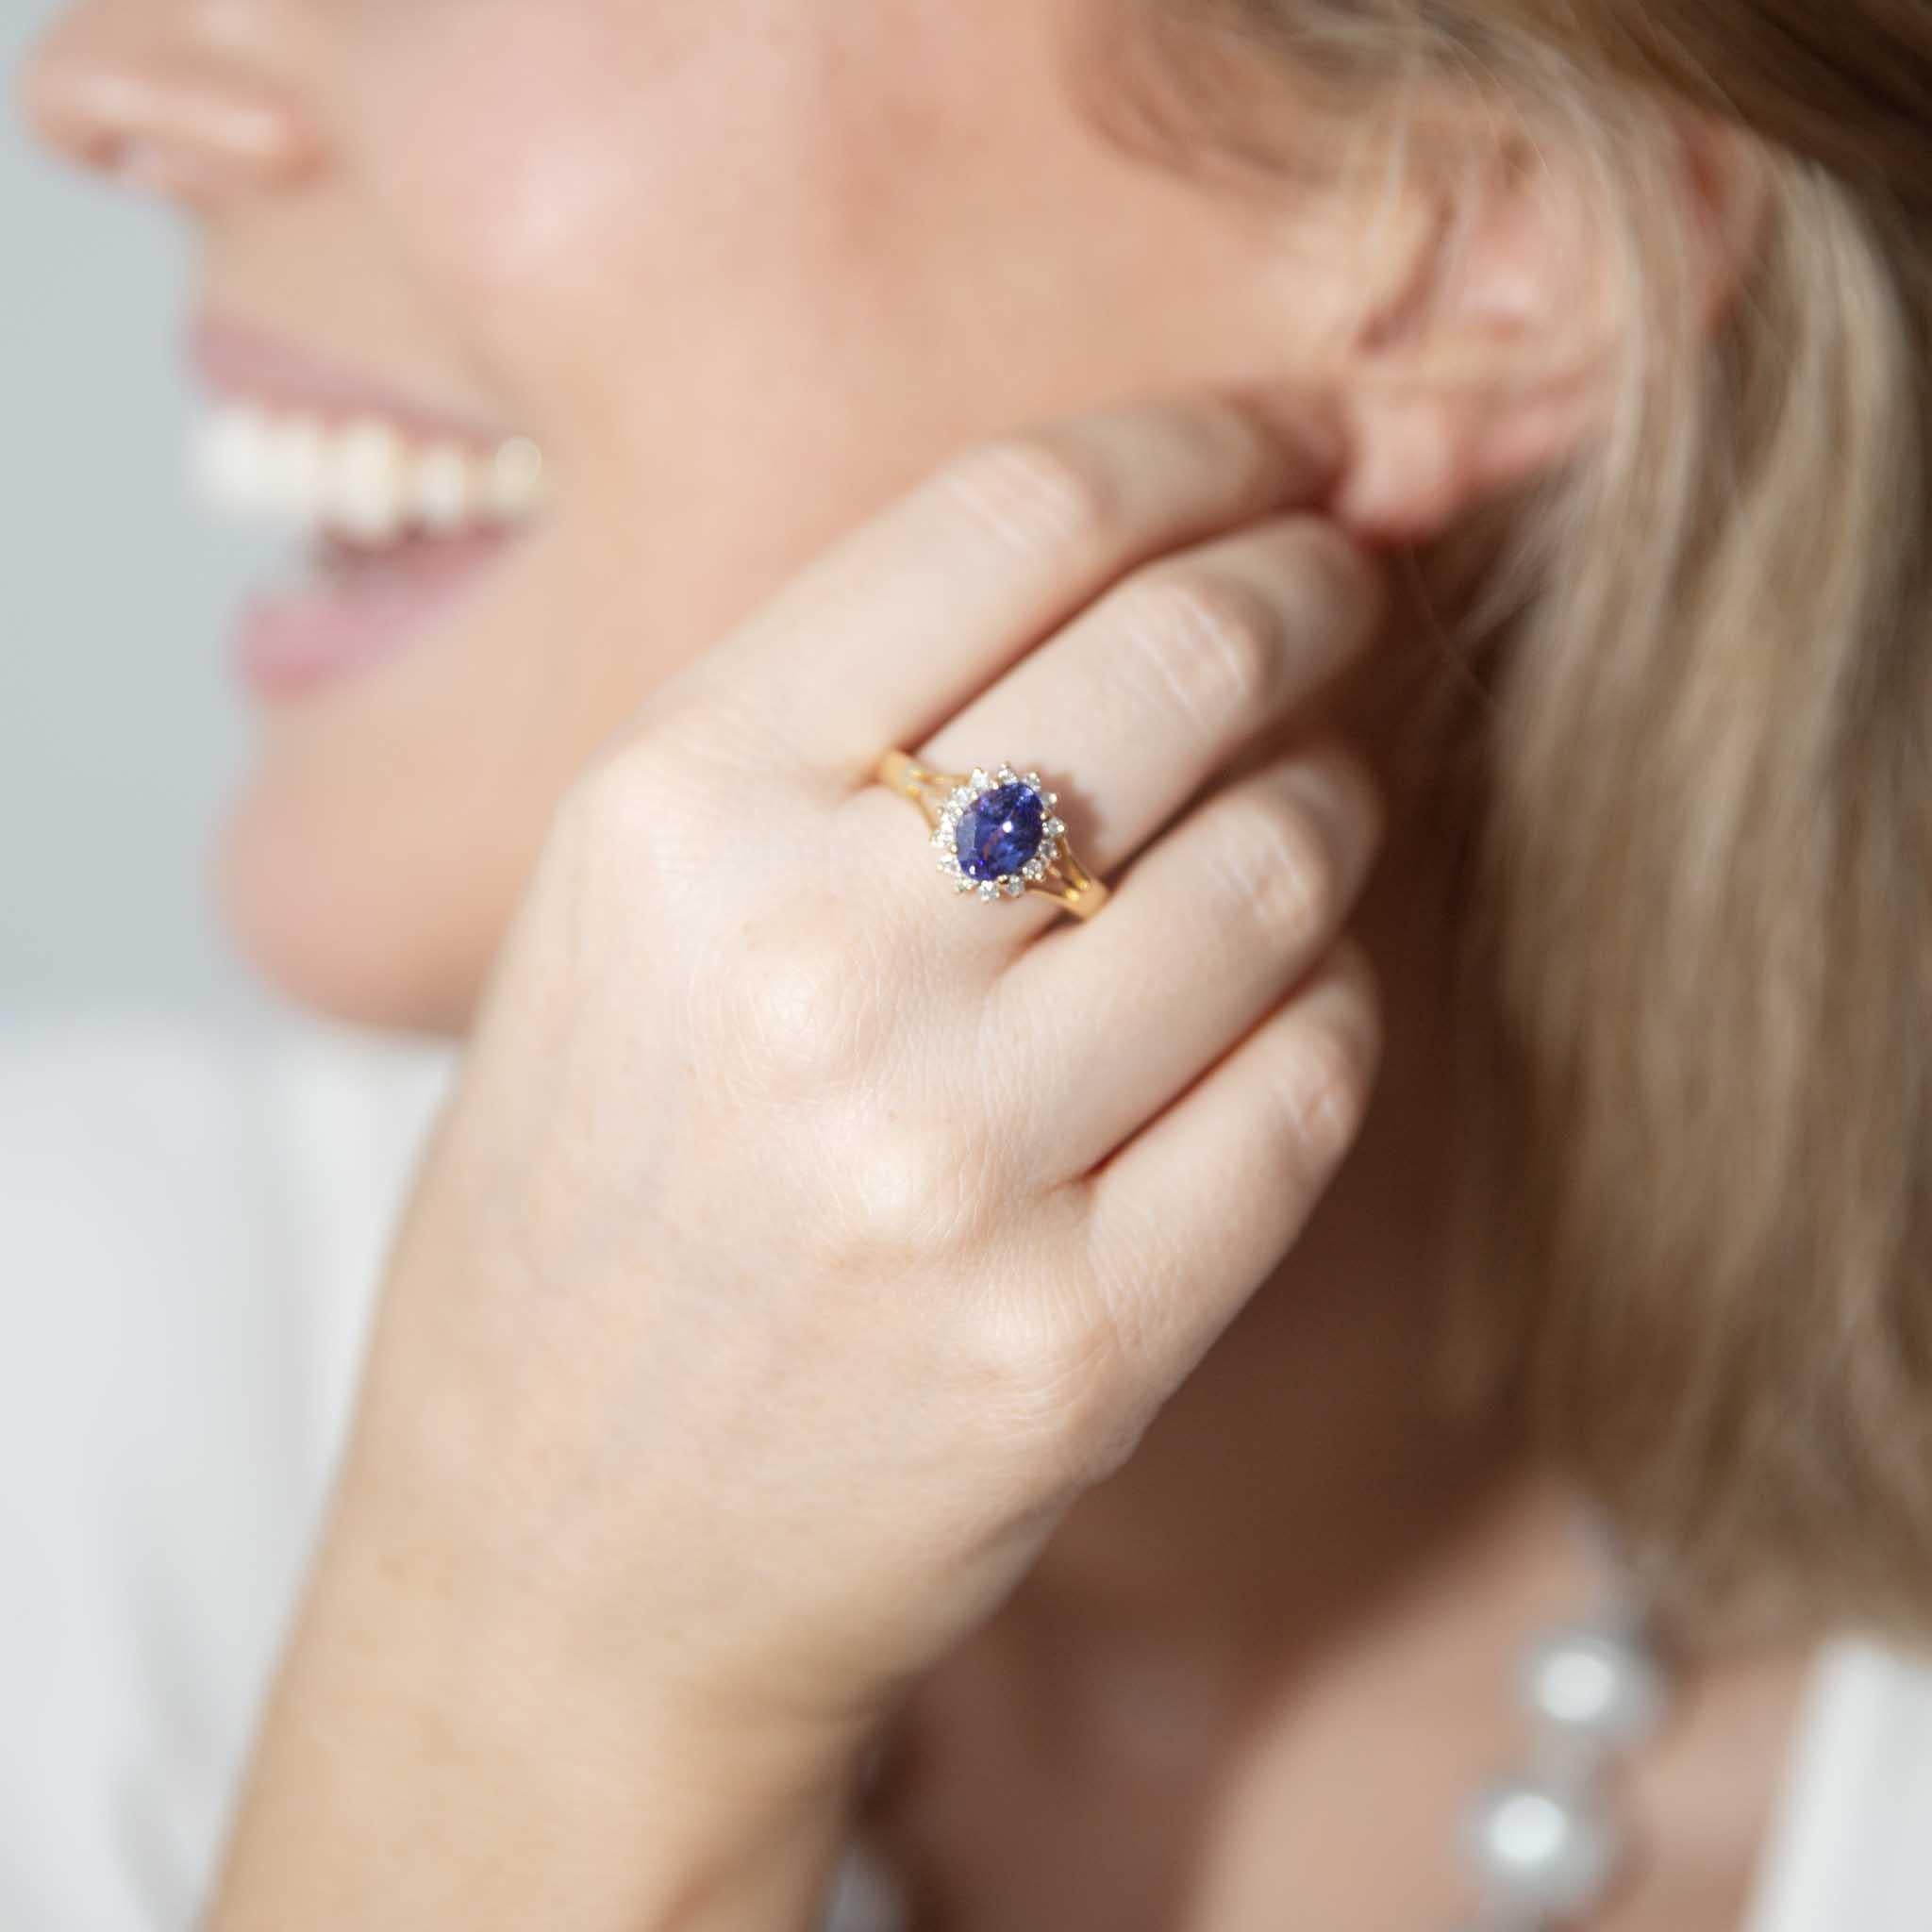 Crafted in 18 carat gold, our Aloy Ring with her royal purple-blue tanzanite set in a halo of shimmering diamonds, is a timeless classic. She is a beautiful way to make promises your heart will keep for generations.

The Aloy Ring Gem Details
The